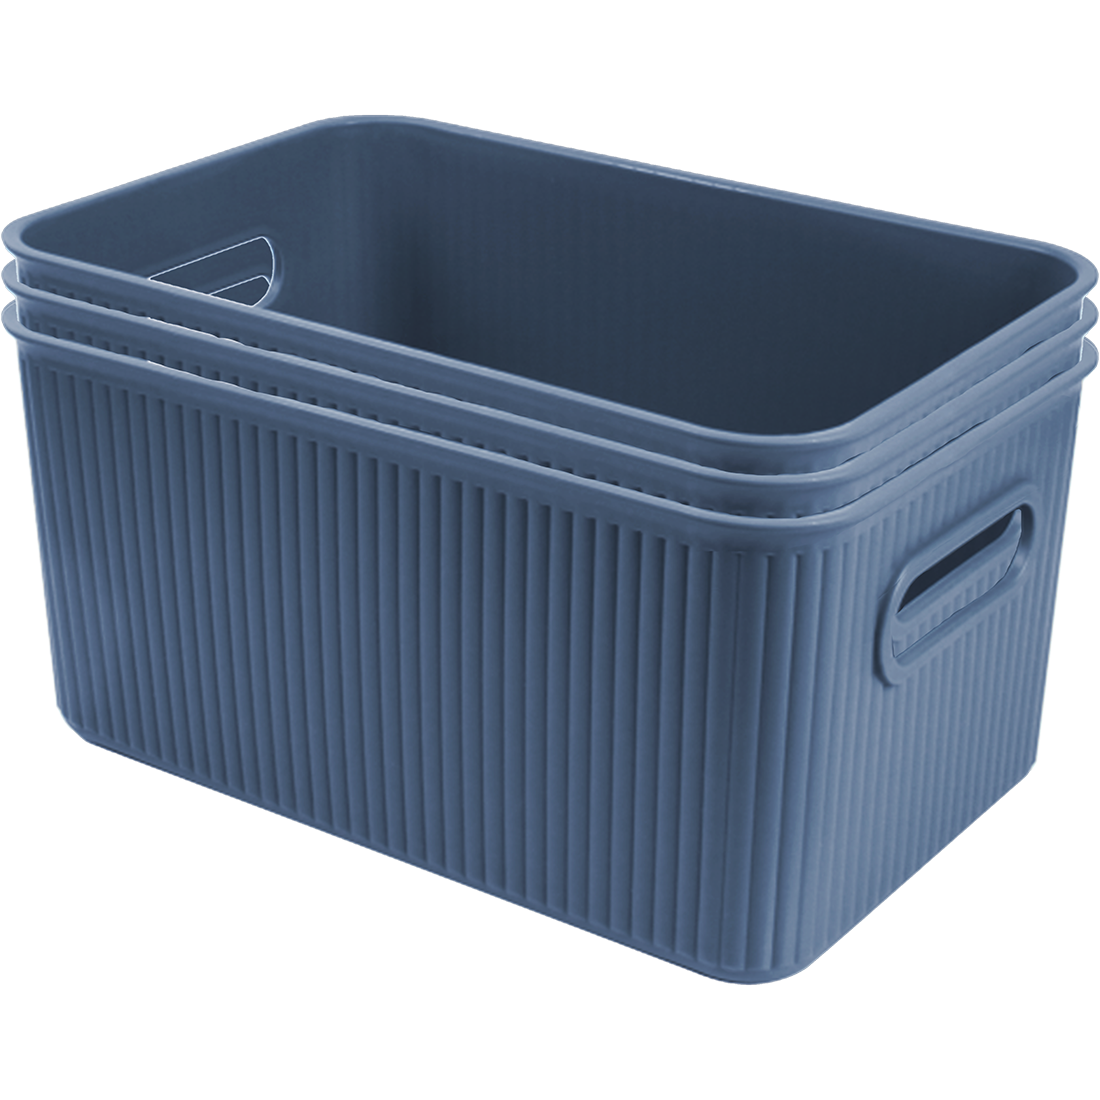 3 Pack Woven Plastic Storage Basket - Striped Navy